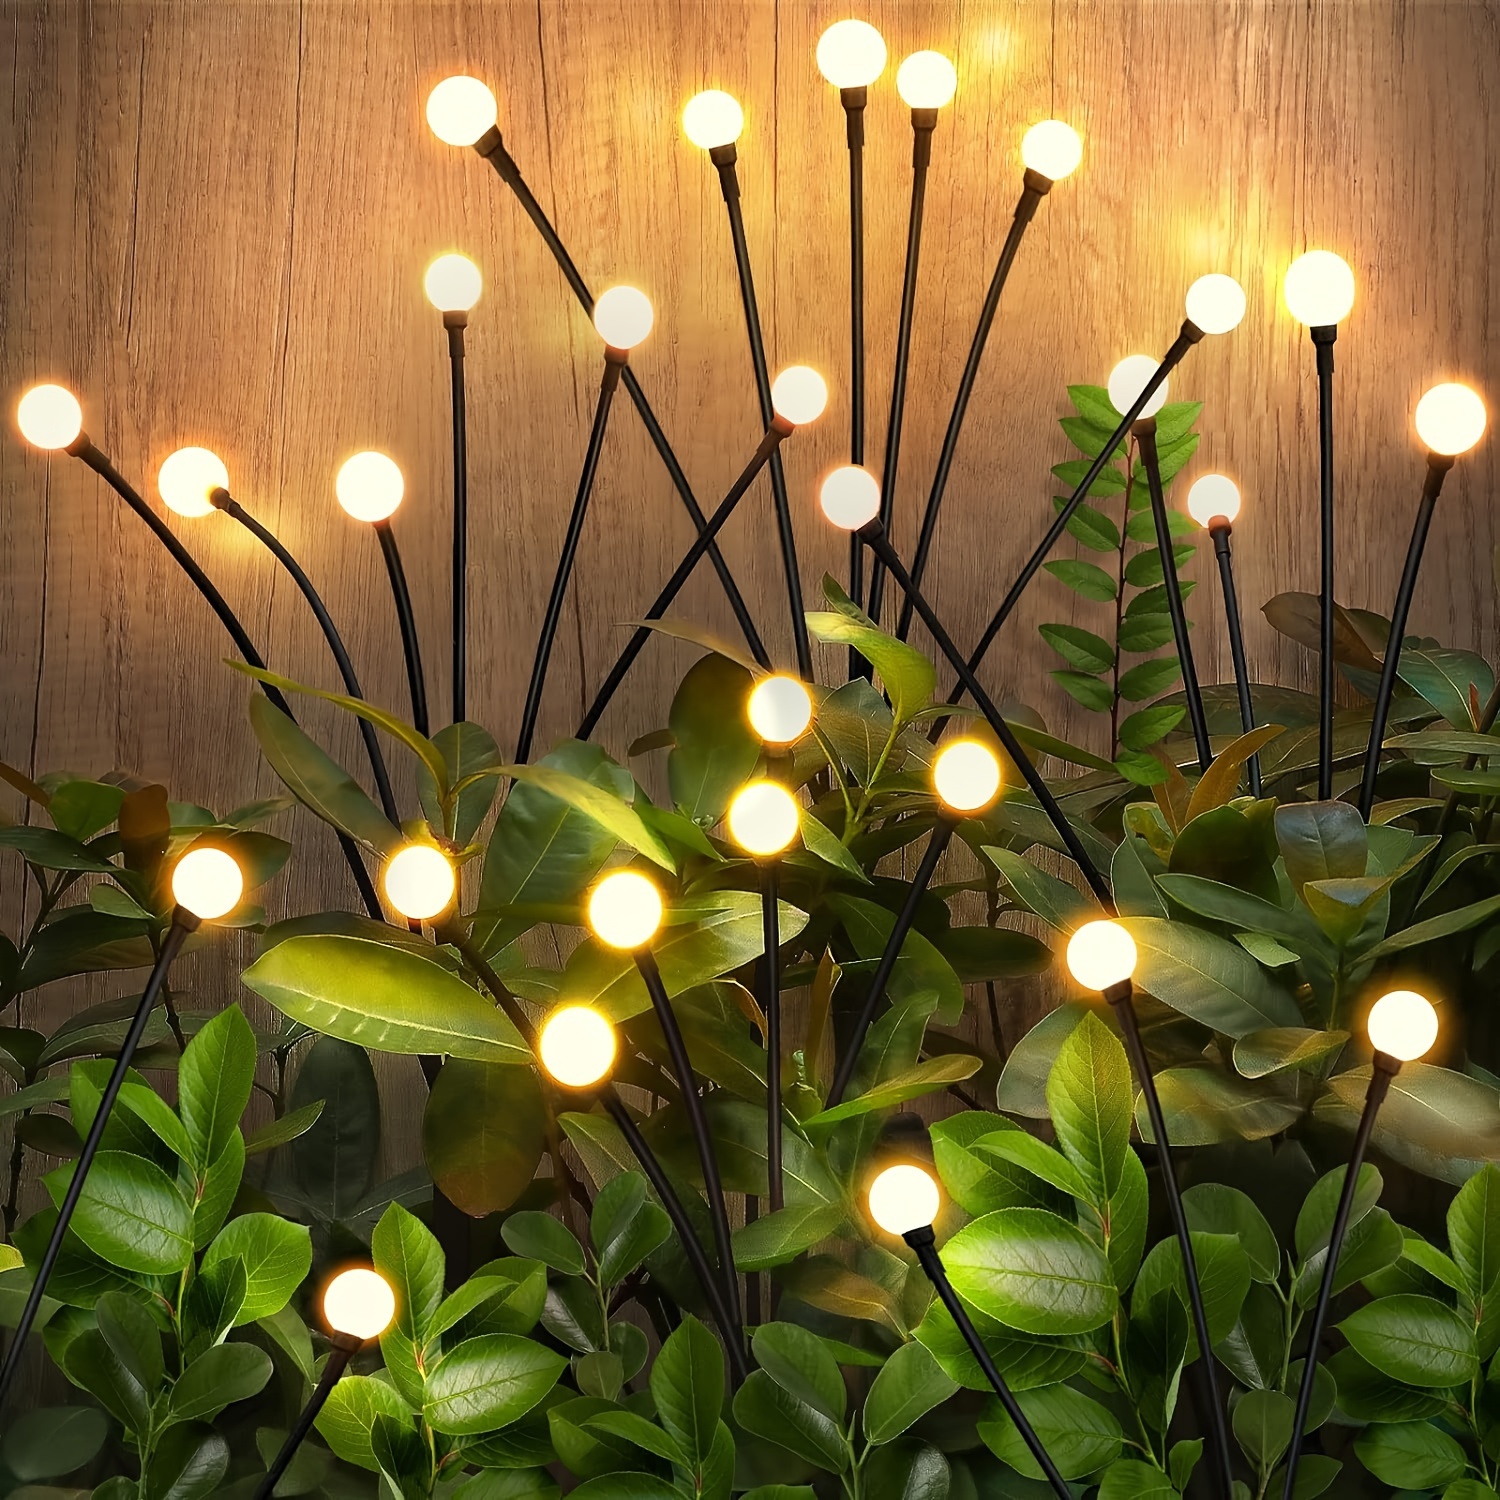 

6 Packs 72 Lights, Upgraded Solar Lights Outdoor - Swaying , Firefly Lights With Highly Flexible Copper Wires, Yard Pathway Christmas Landscape Stake Lights